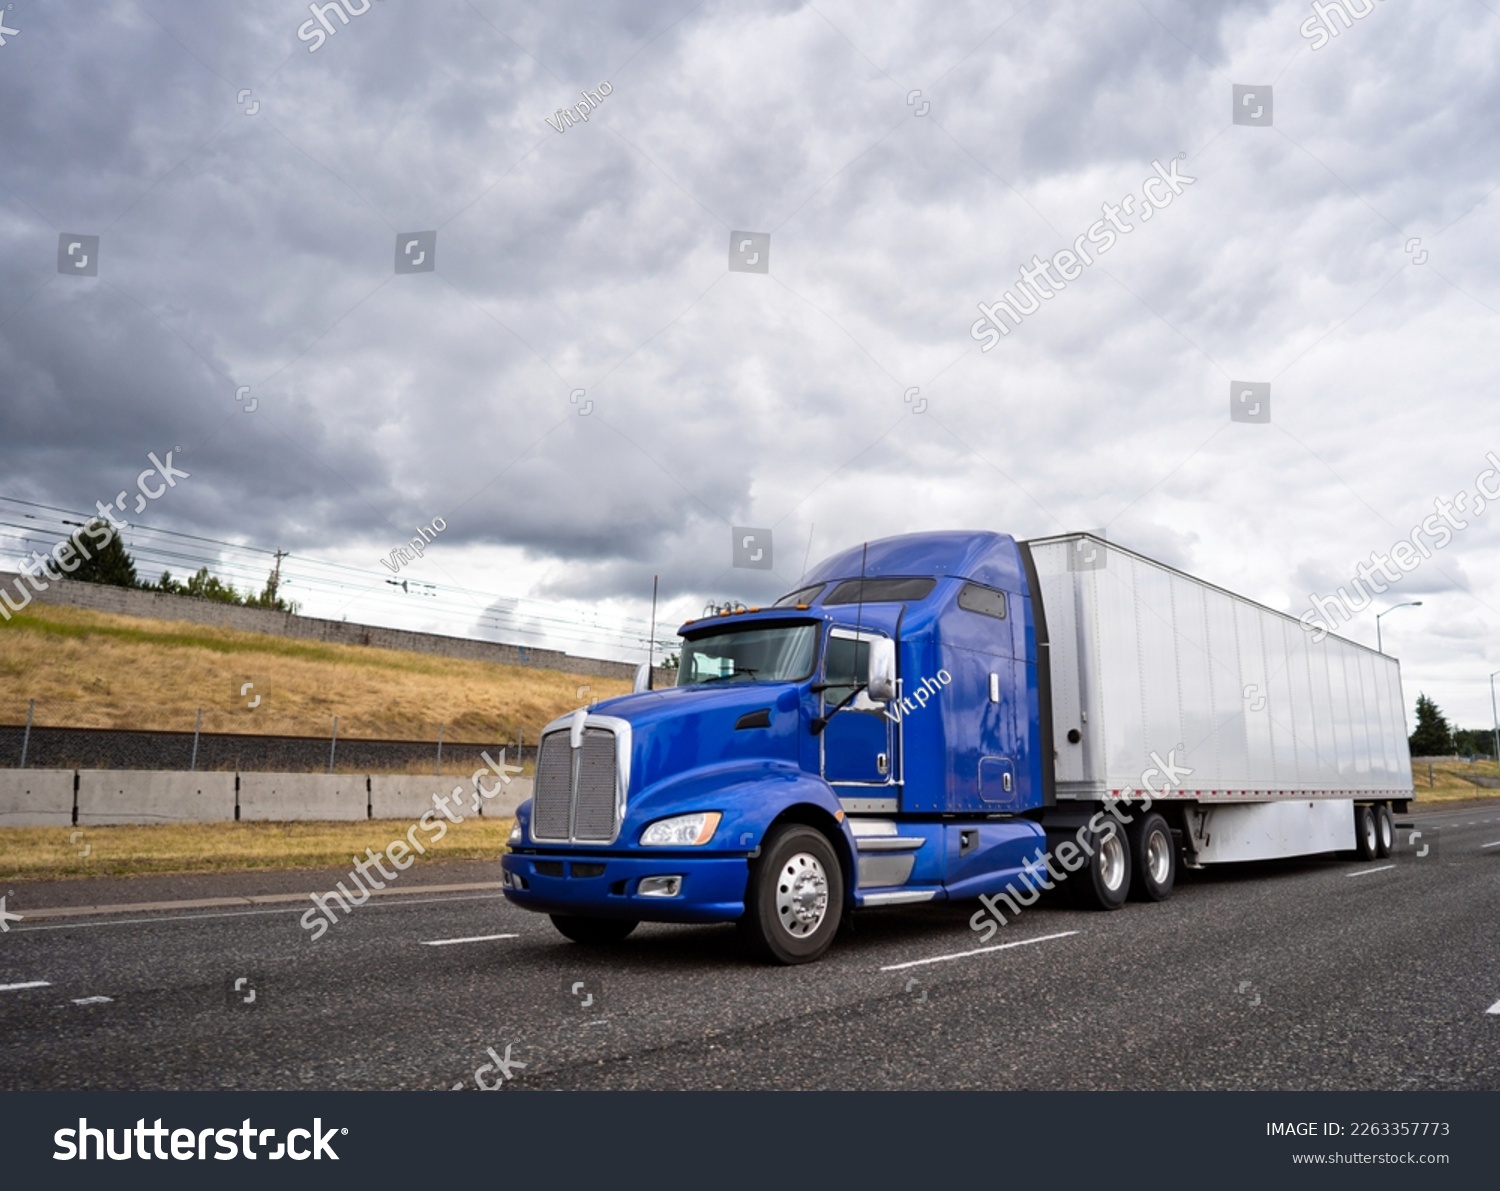 Classic dark blue big rig American popular bonnet semi truck with dry van semi trailer going on wide highway with stormy sky caring commercial cargo for delivery to business warehouse  #2263357773